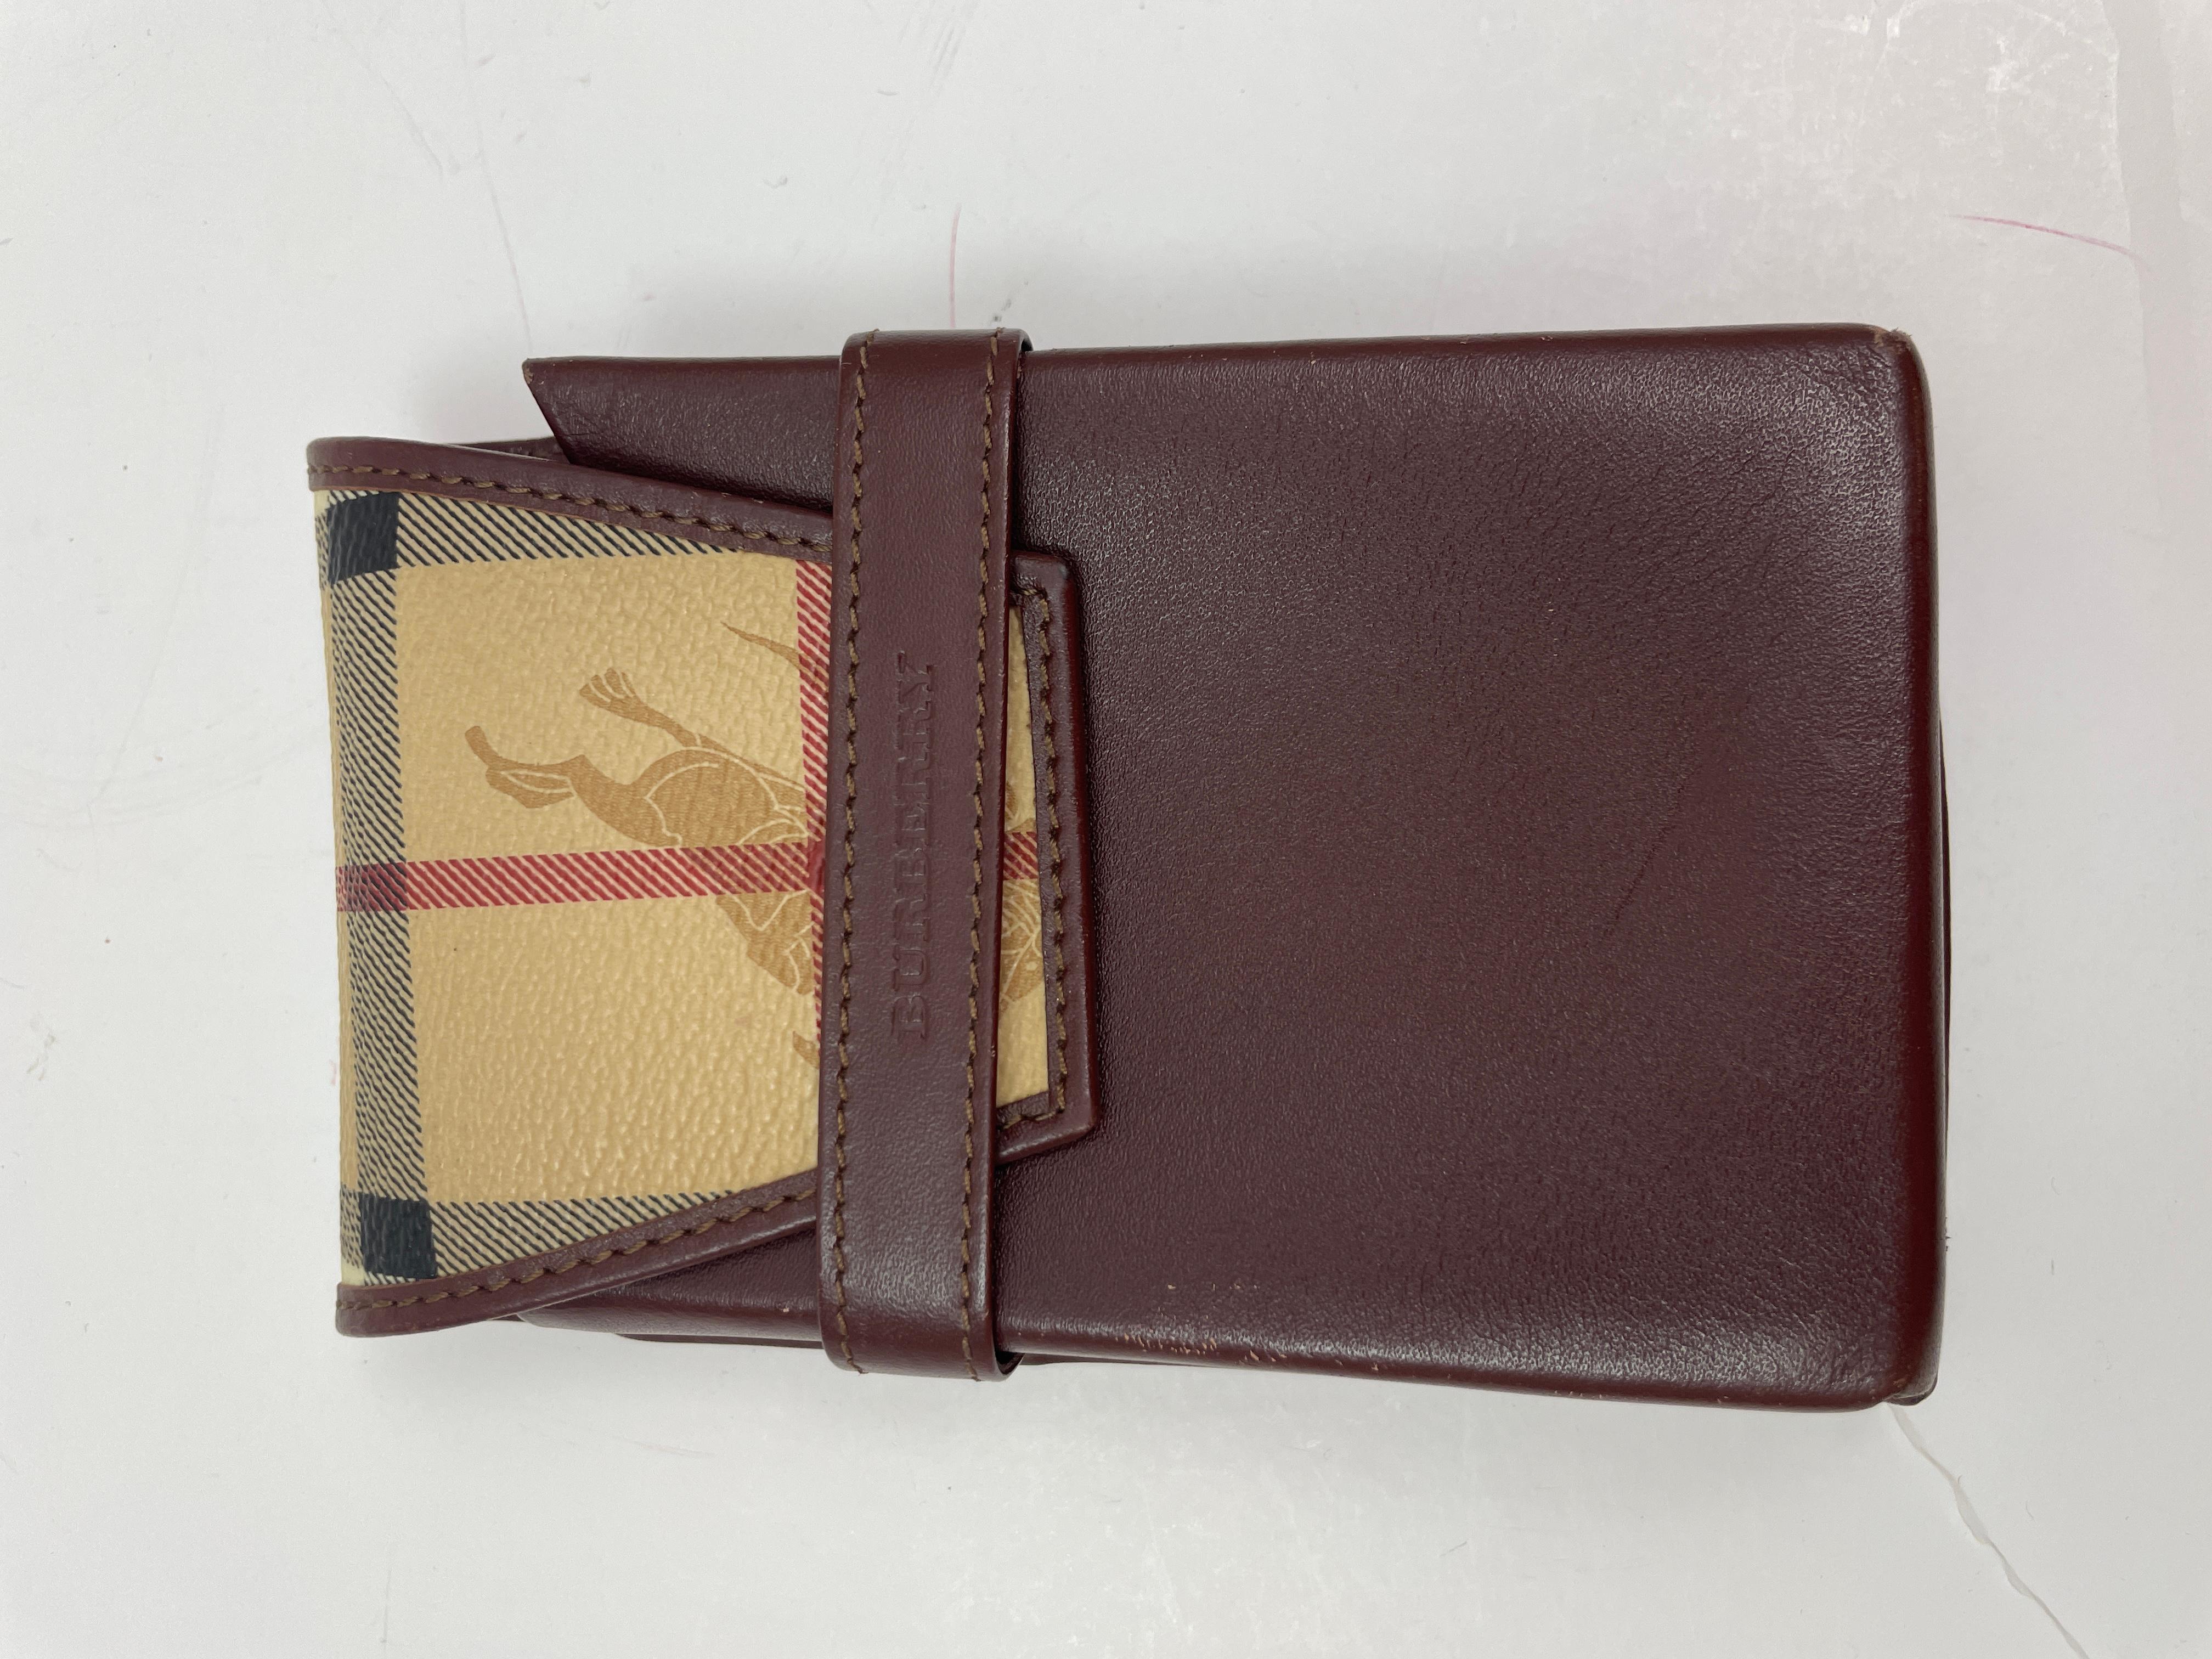 Vintage Burberry cigarette case or wallet with flap closure.
Good condition vintage cigarette pack holder, great to use as a wallet or to store keys, phone, lipsticks, playing game cards.
Vintage Burberry London leather case or wallet.
You can carry